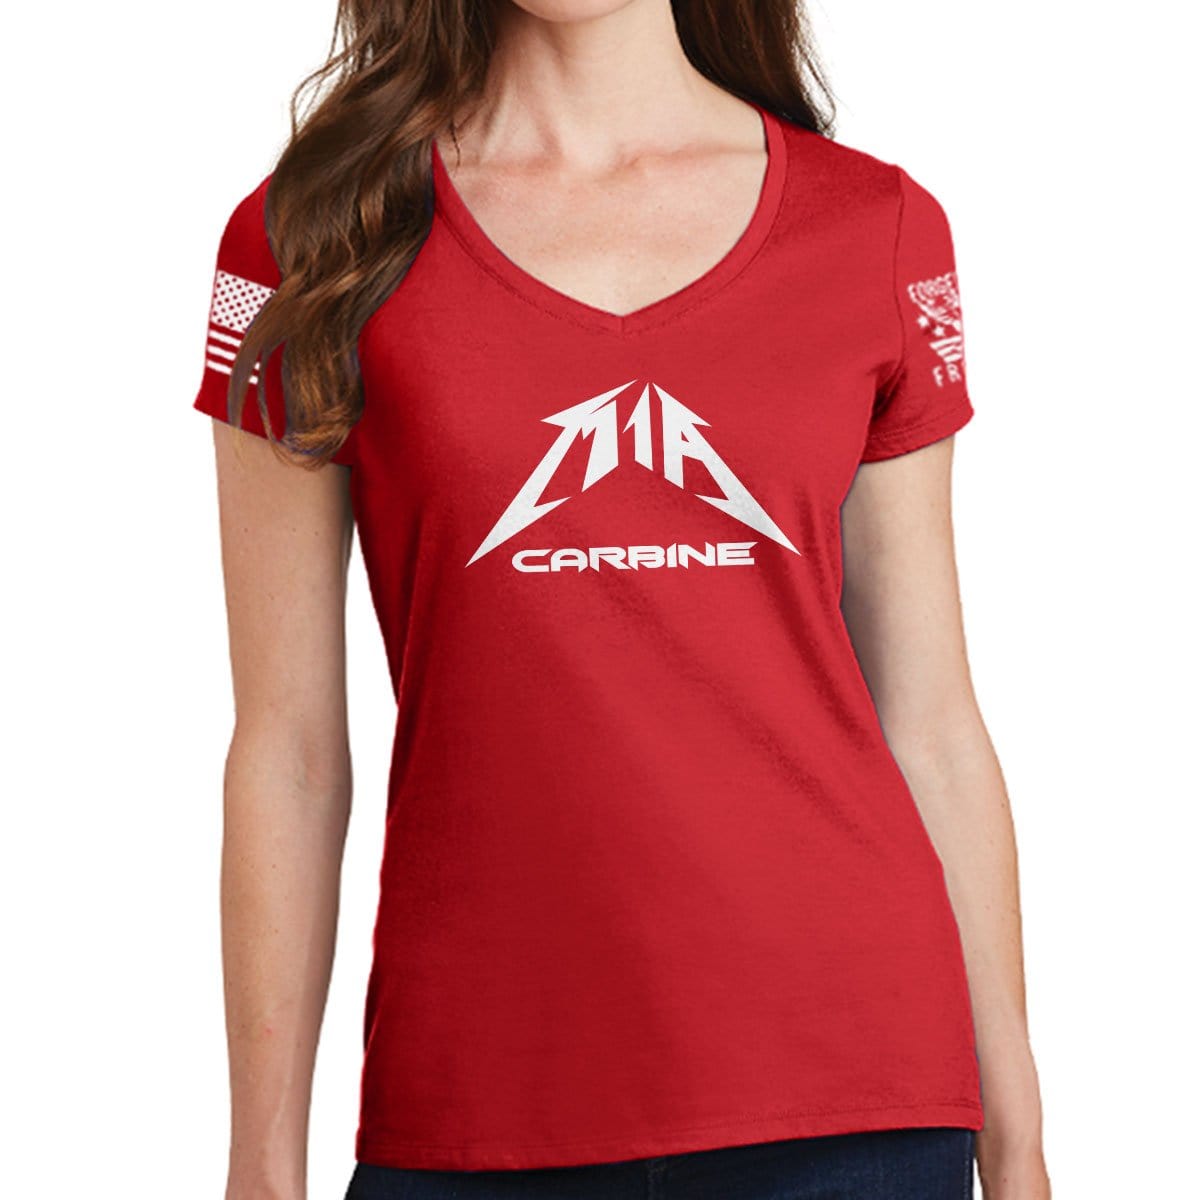 Ladies M1A Carbine V-Neck T-shirt – Forged From Freedom